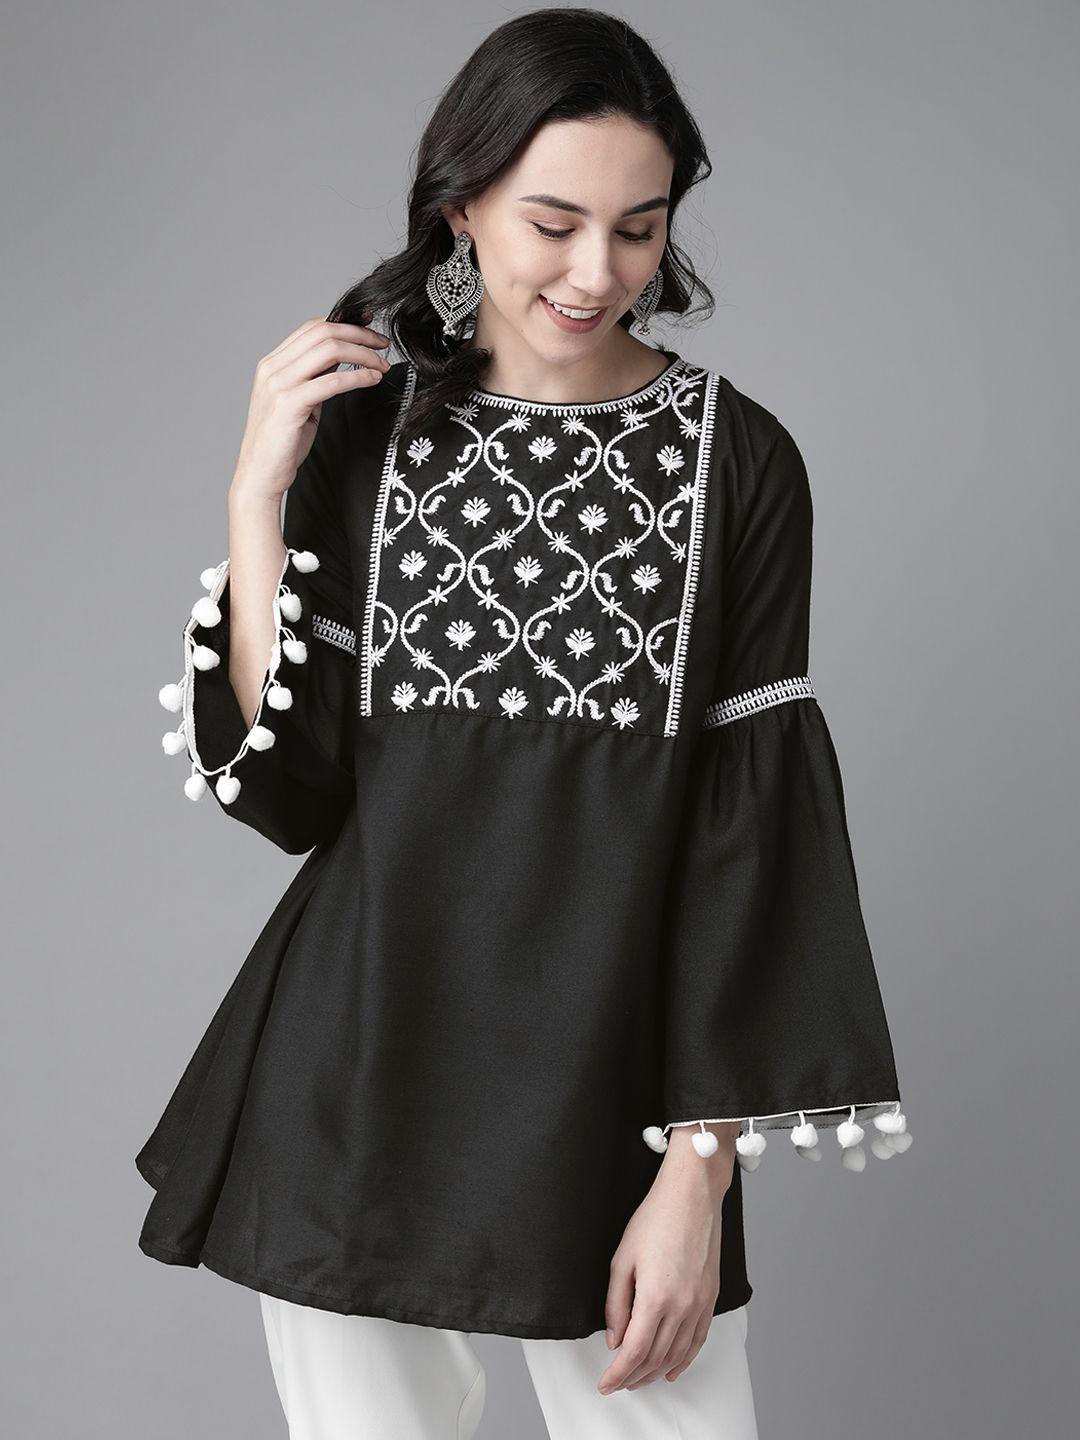 bhama-couture-women-black-&-white-embroidered-tunic